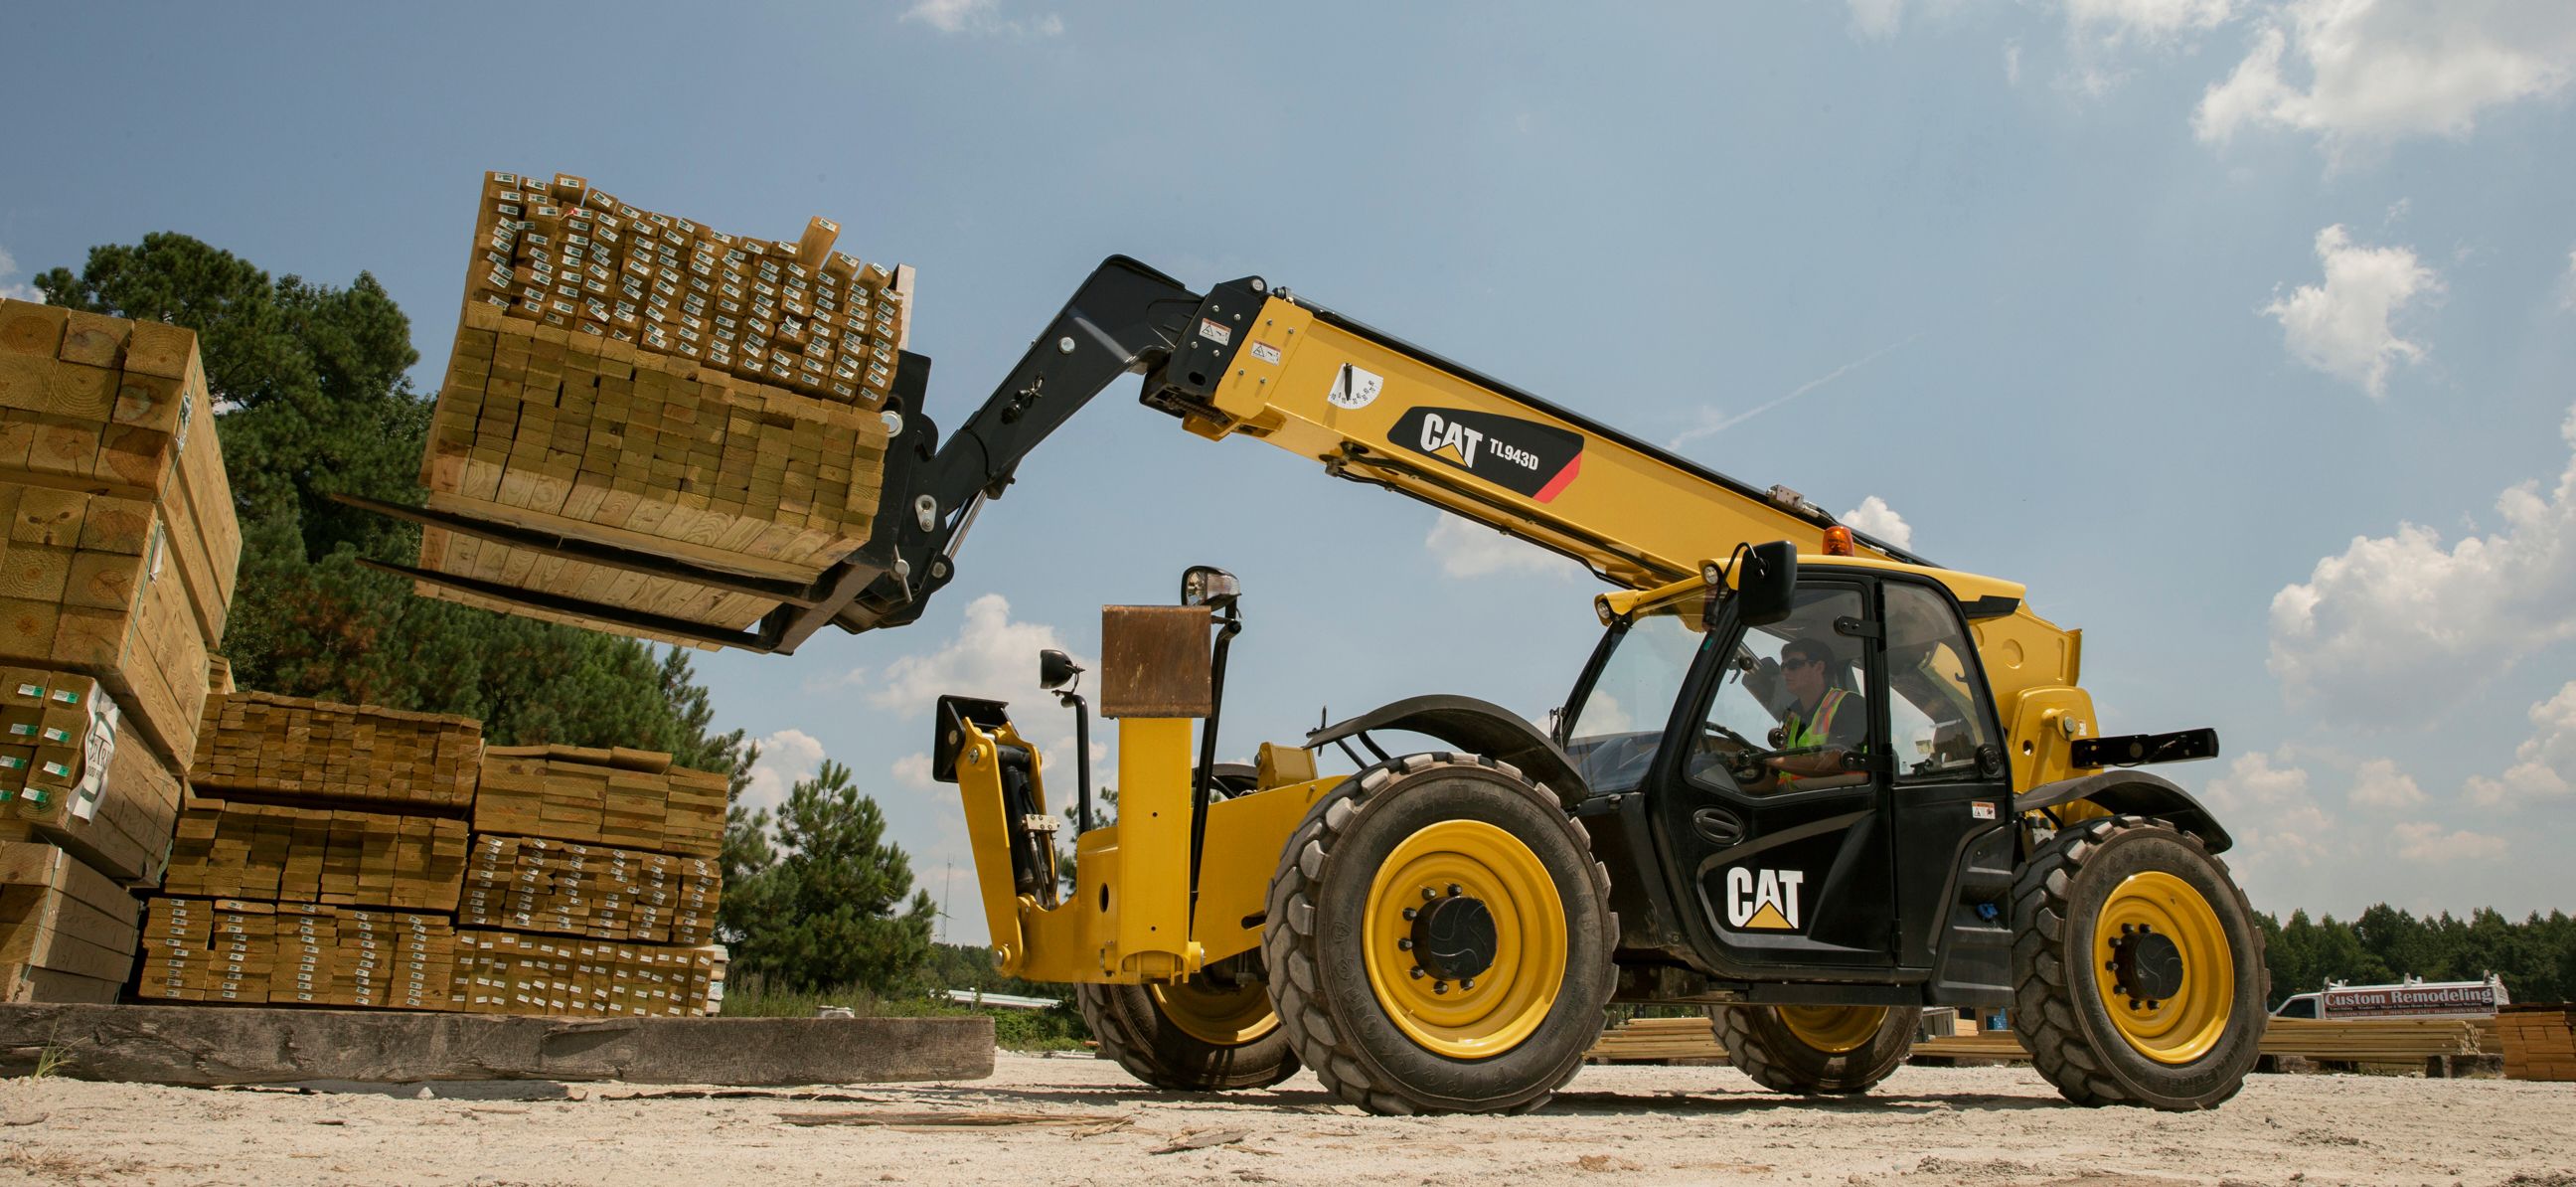 How to Choose the Best Aerial Lift for Your Job